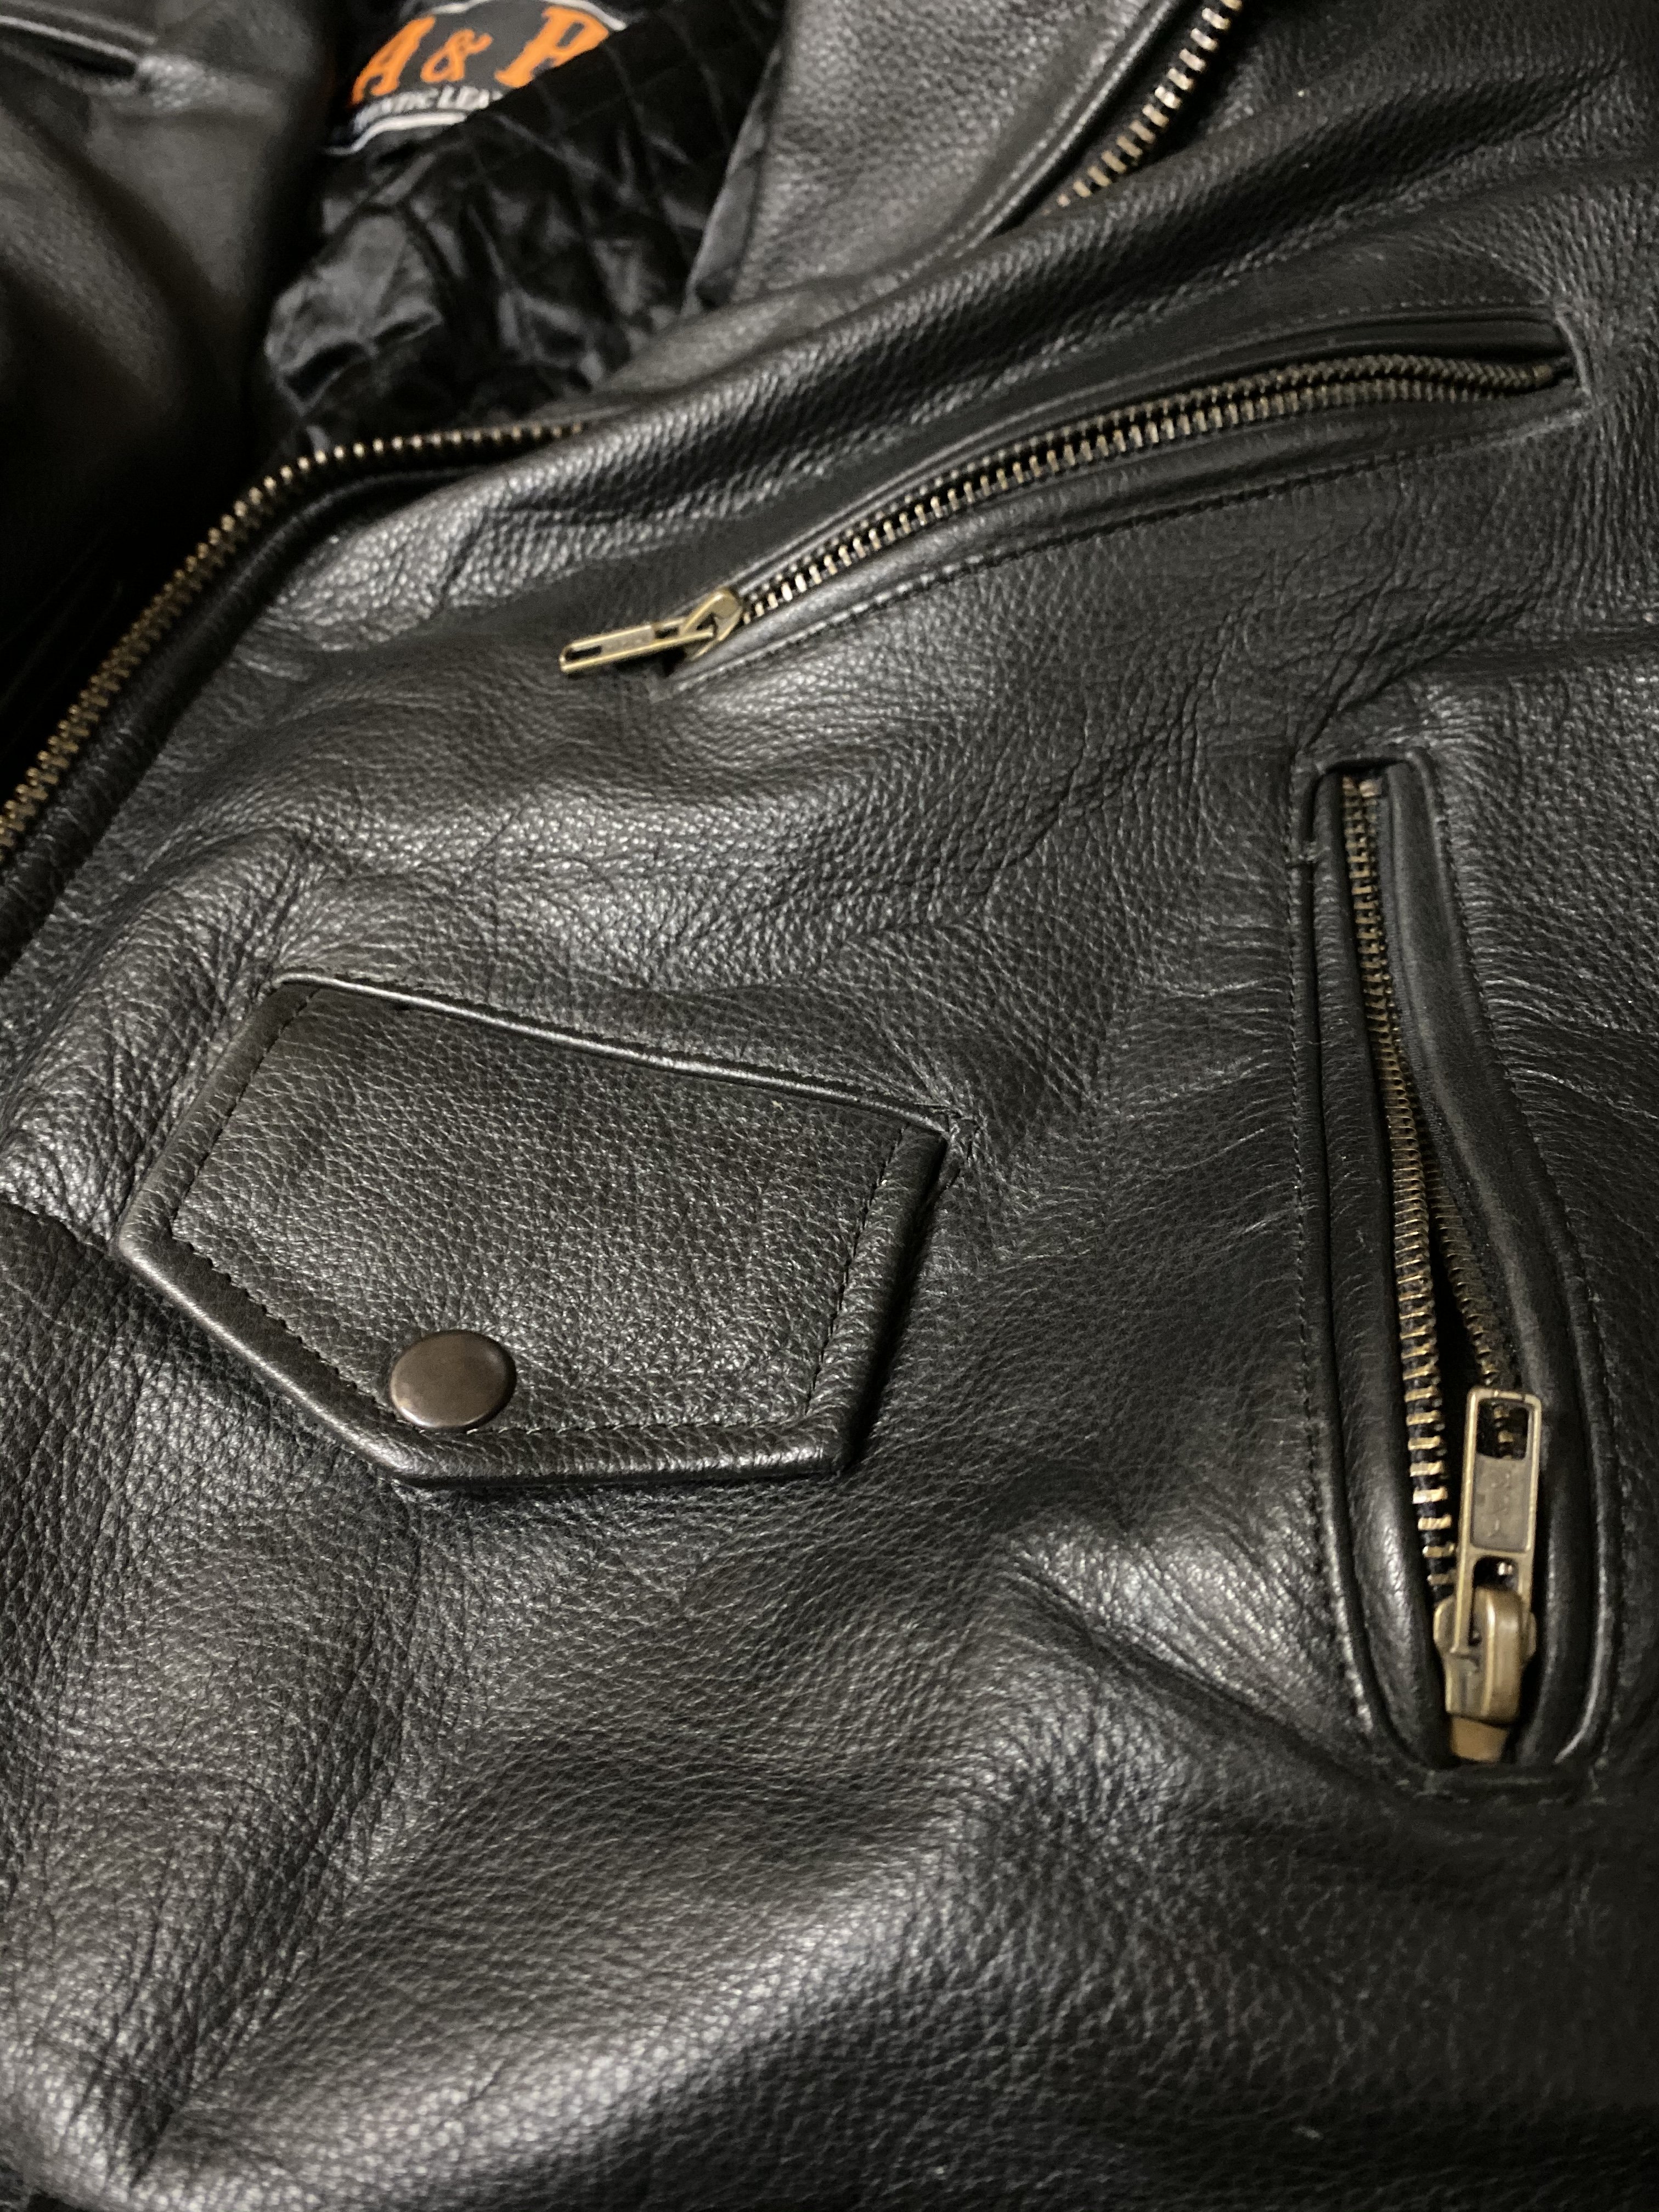 Anyone ever heard of this company? | Vintage Leather Jackets Forum